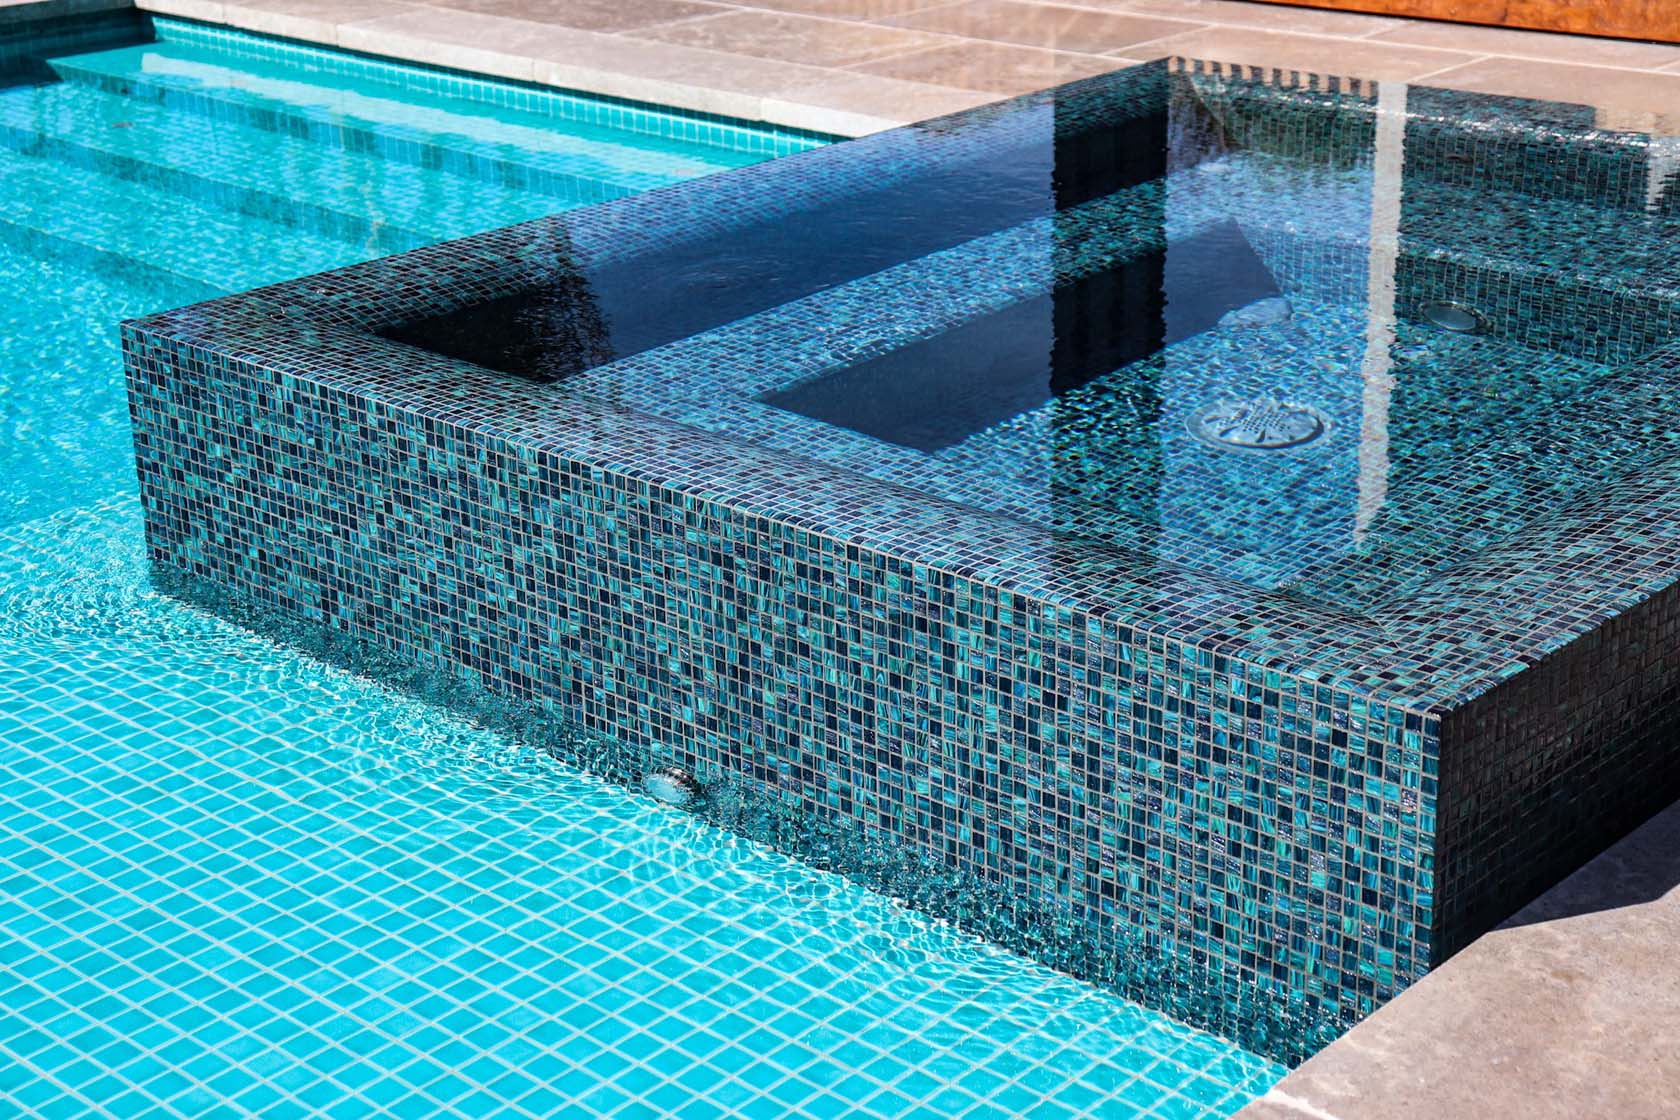 GC210 Peacock glass mosaic fully tiled spa and Neptune aqua glass fully tiled pool